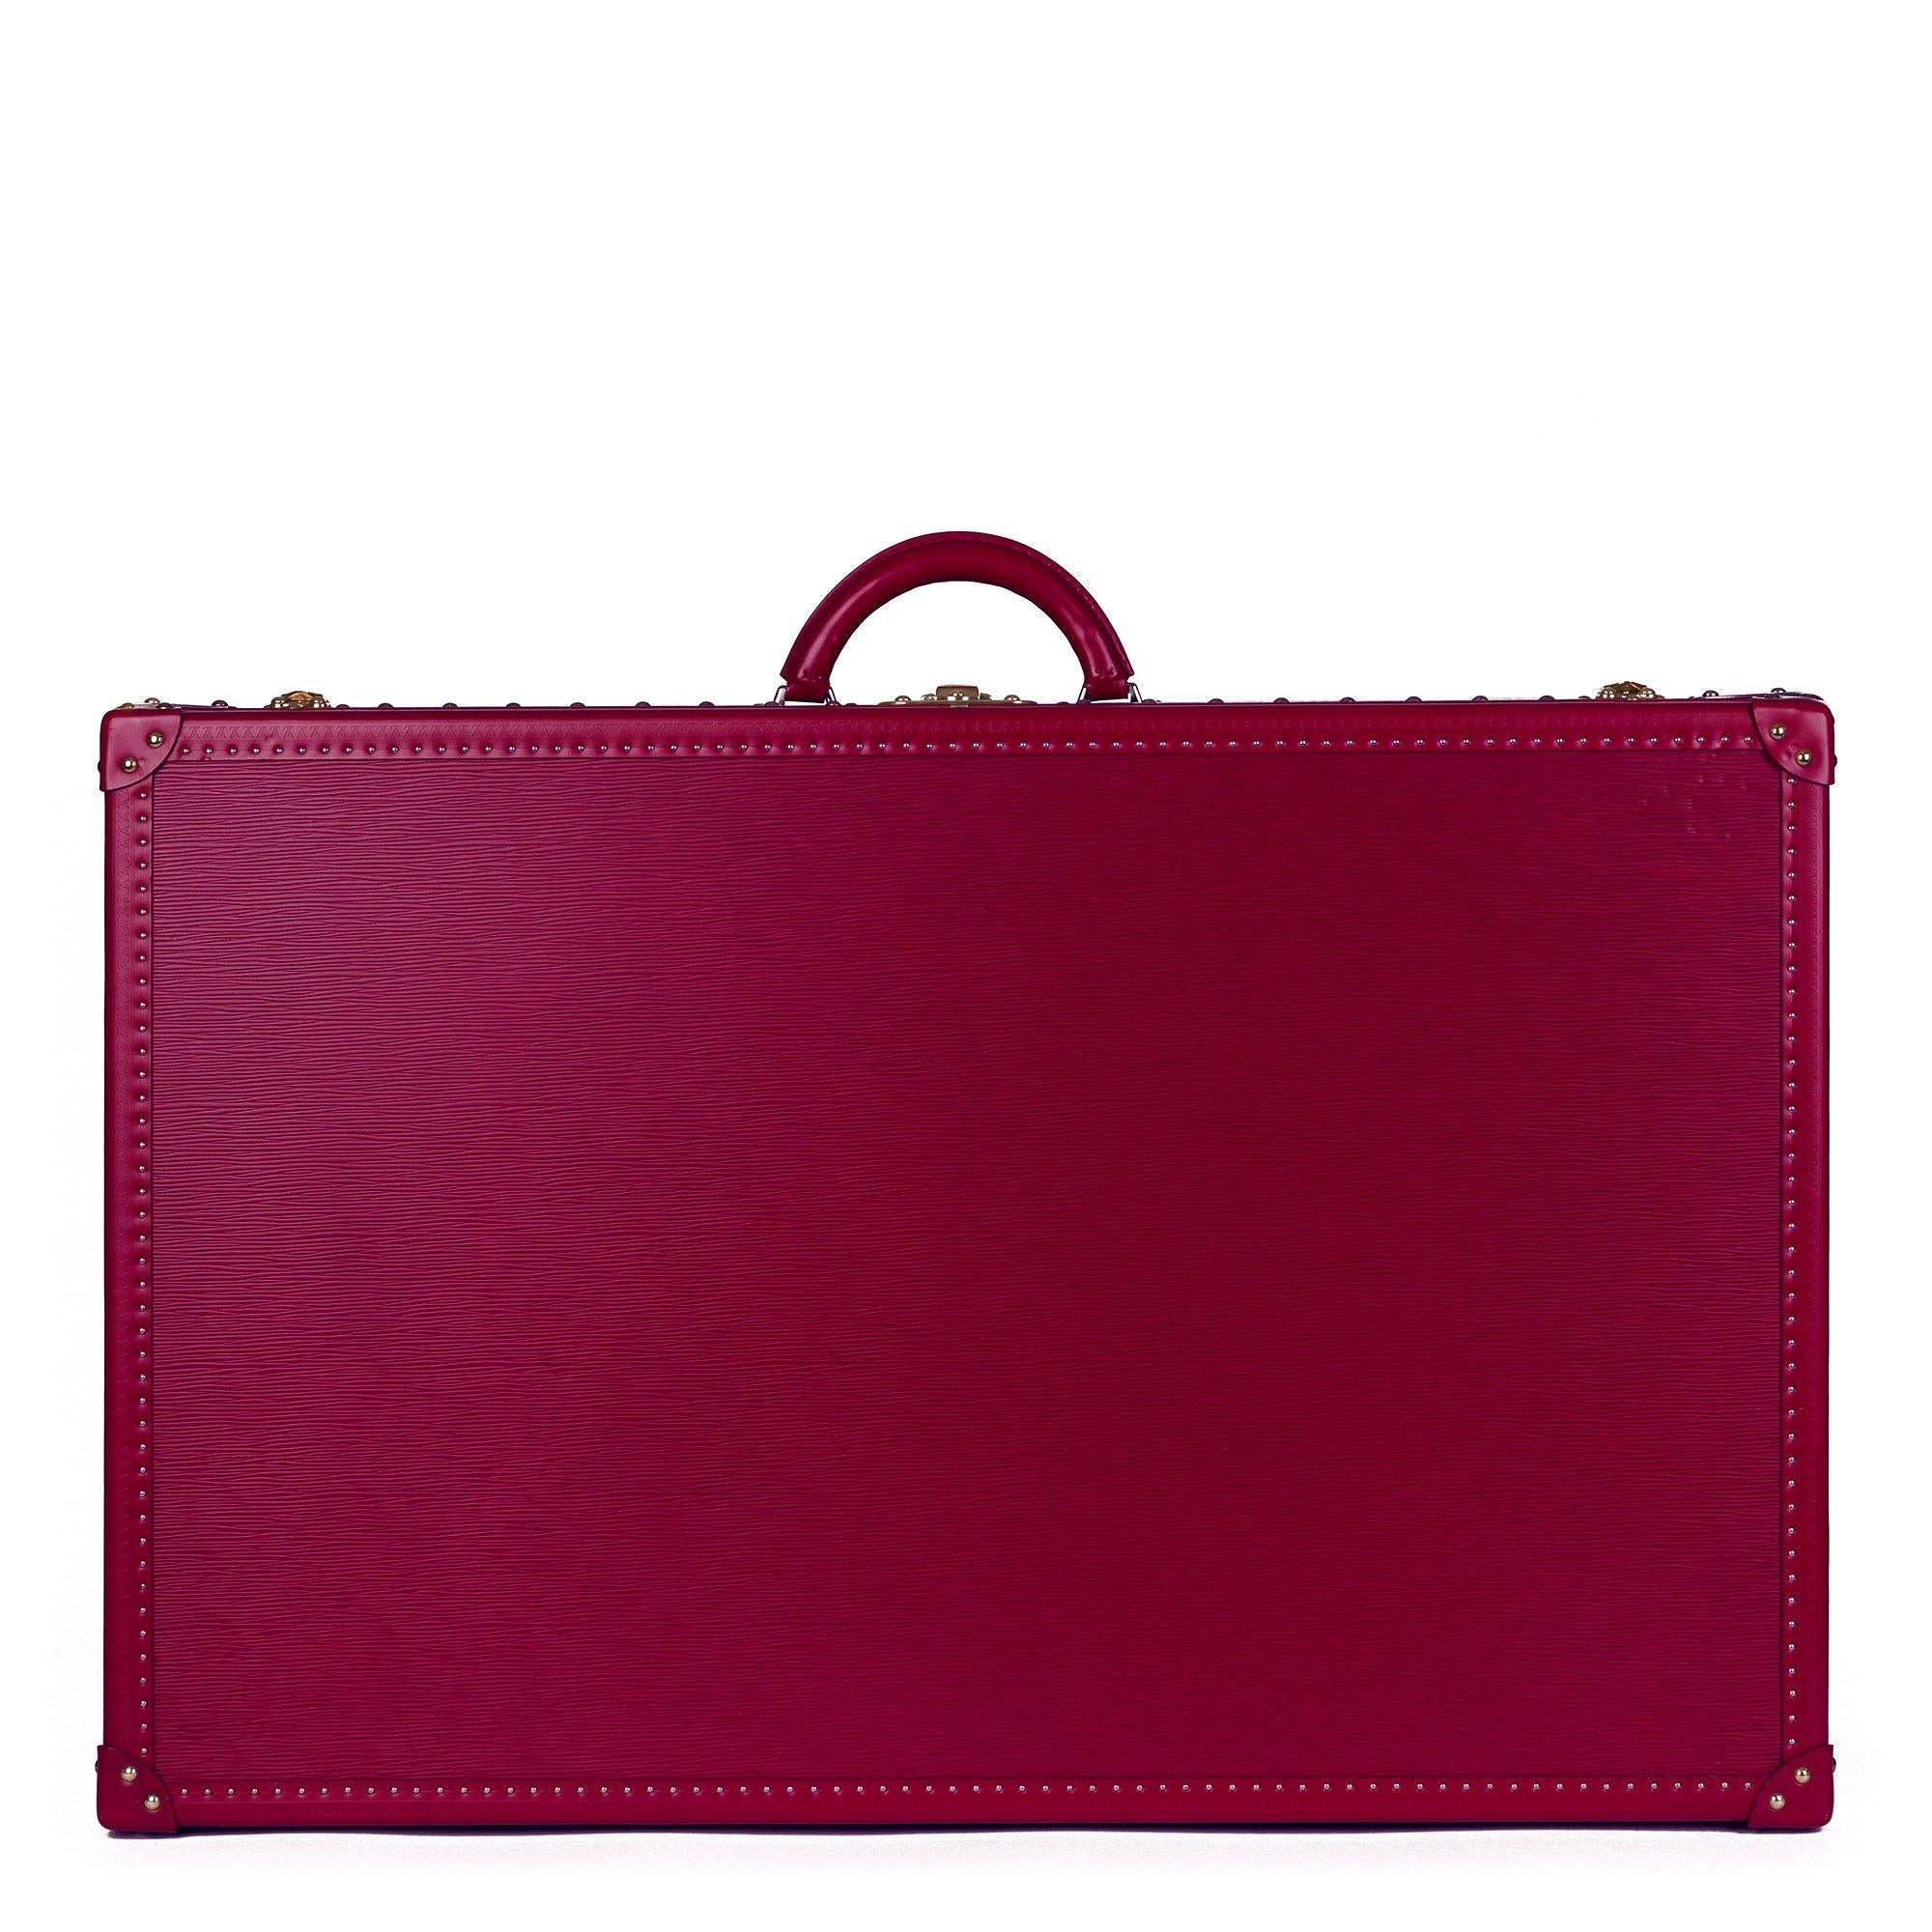 Louis Vuitton FUCHSIA EPI LEATHER ALZER 80

CONDITION NOTES
The exterior is in excellent condition with light signs of use.
The interior is in excellent condition with light signs of use.
The hardware is in excellent condition with light signs of